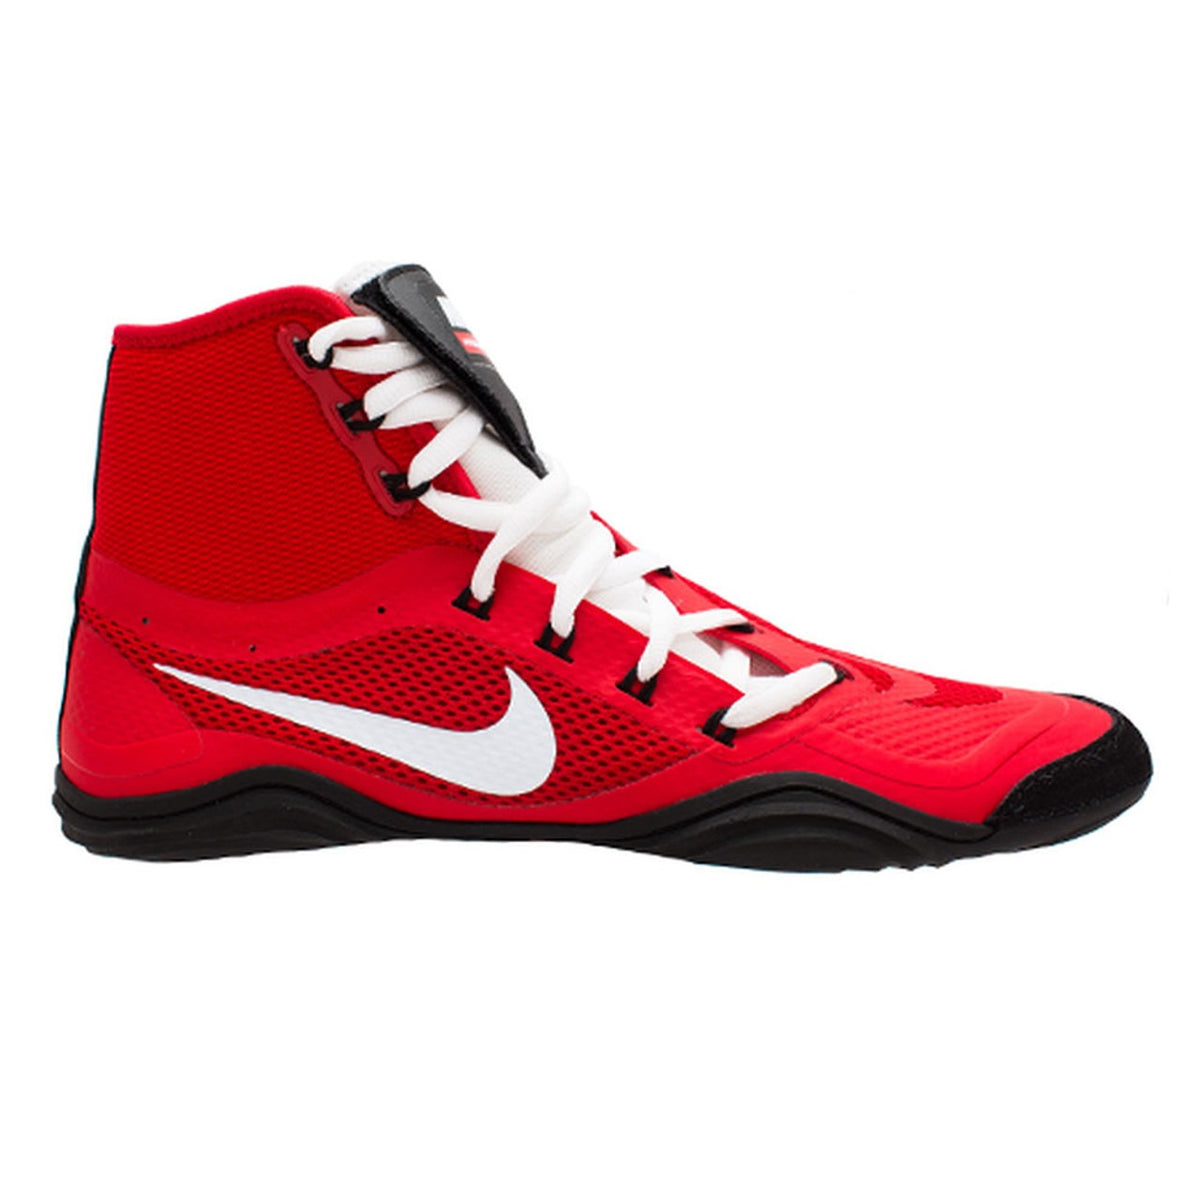 Nike wrestling shoes HYPERSWEEP LE. The professional wrestling shoe for all ambitious wrestlers. With the most advanced technology, the Nike Hypersweep gives you plenty of grip on the wrestling mat. In training and competition. Here in the color red.